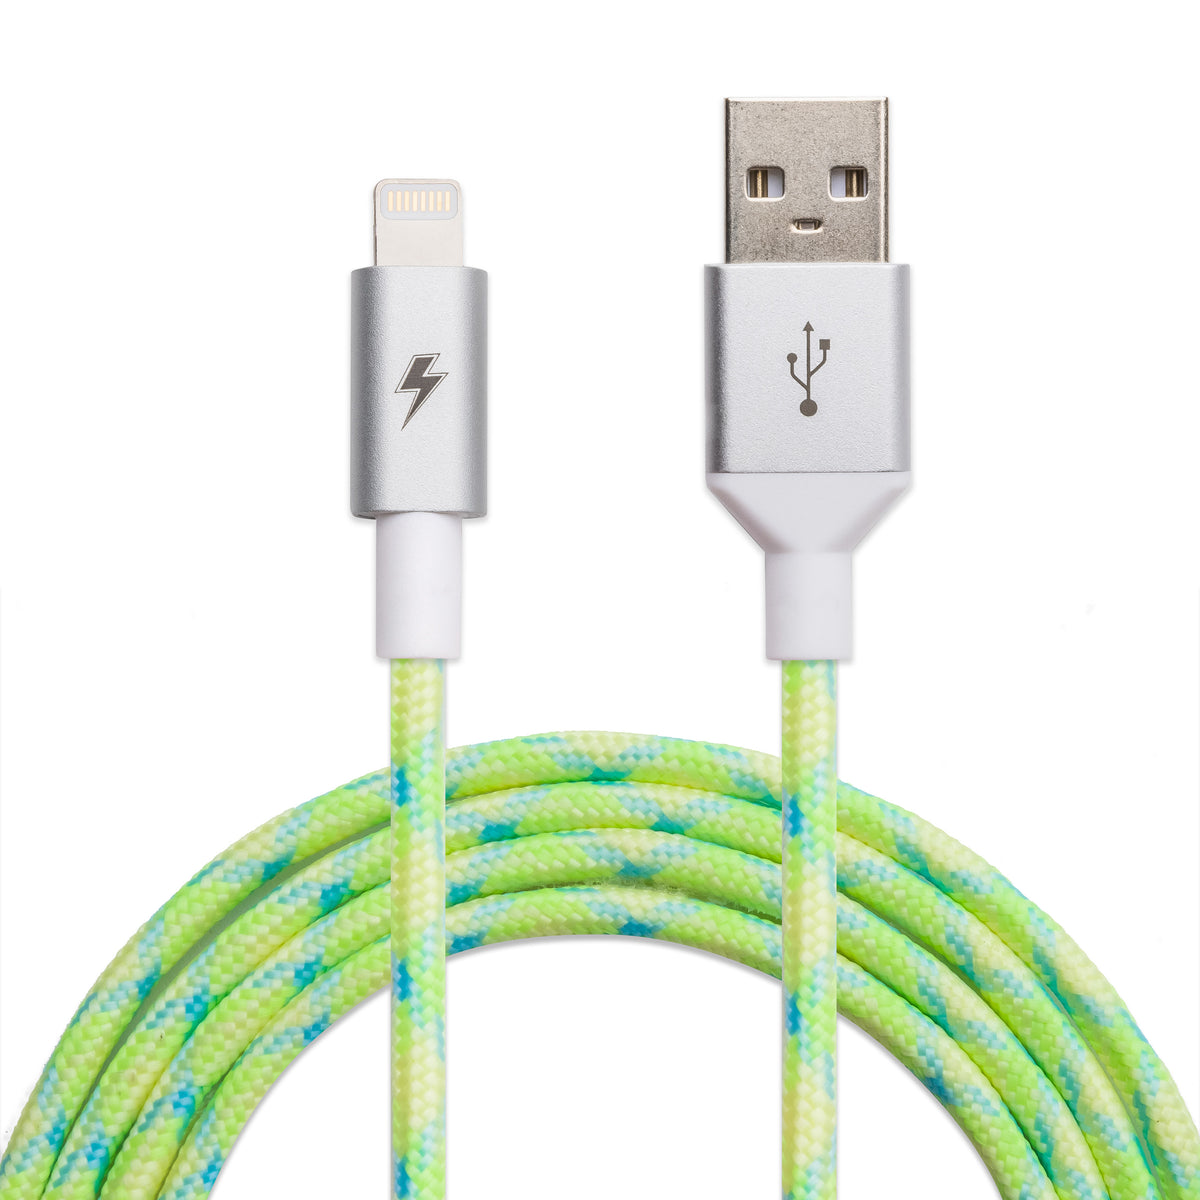 Festival Lightning Cable [10 ft / 3m length] – Charge Cords